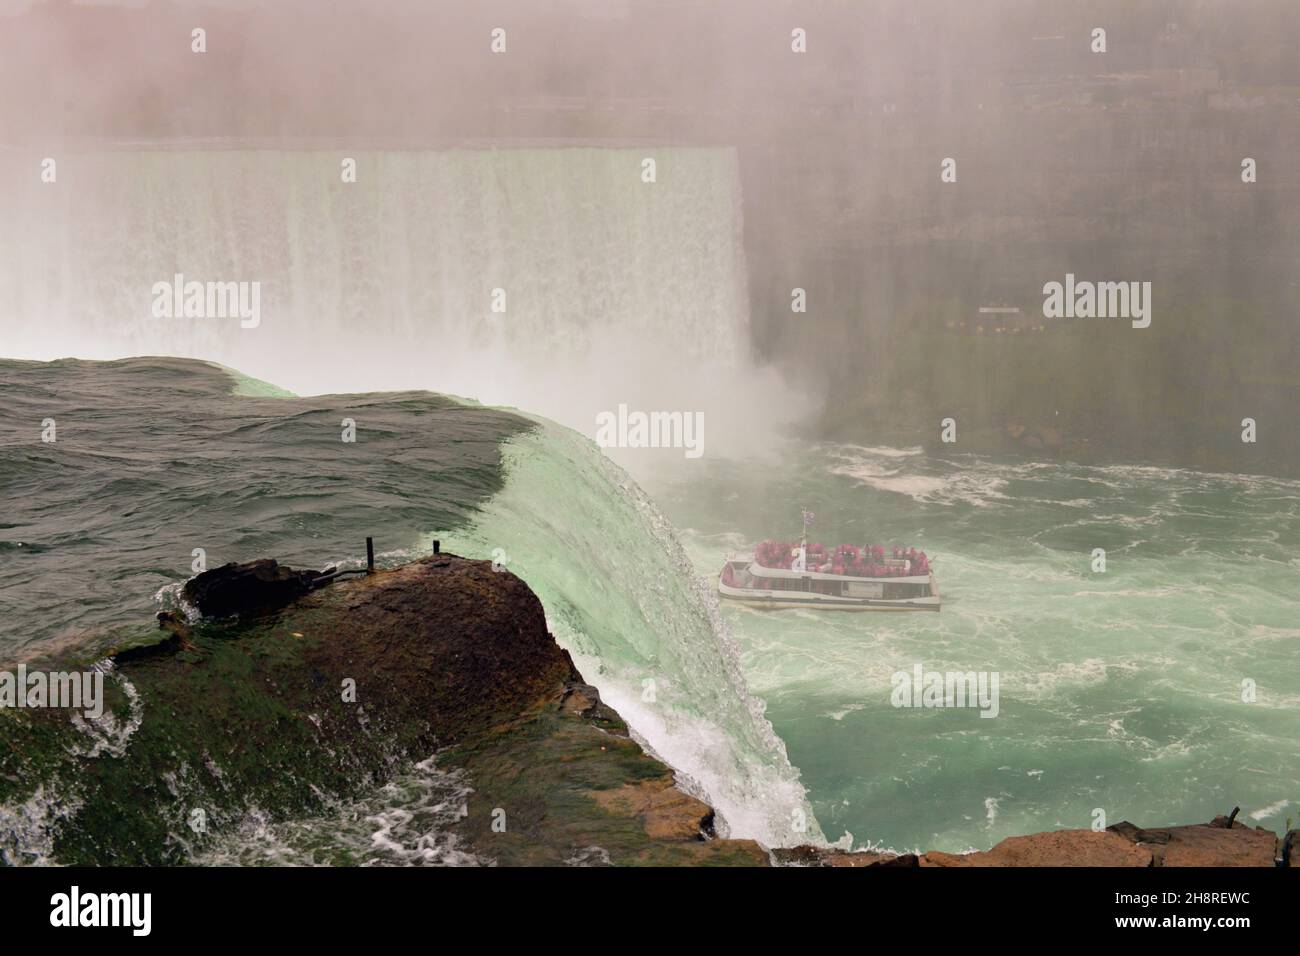 Niagra Falls, New York, USA. Spray and foam from Horseshoe Falls seen from Terrapin Point above the Niagra River. Stock Photo